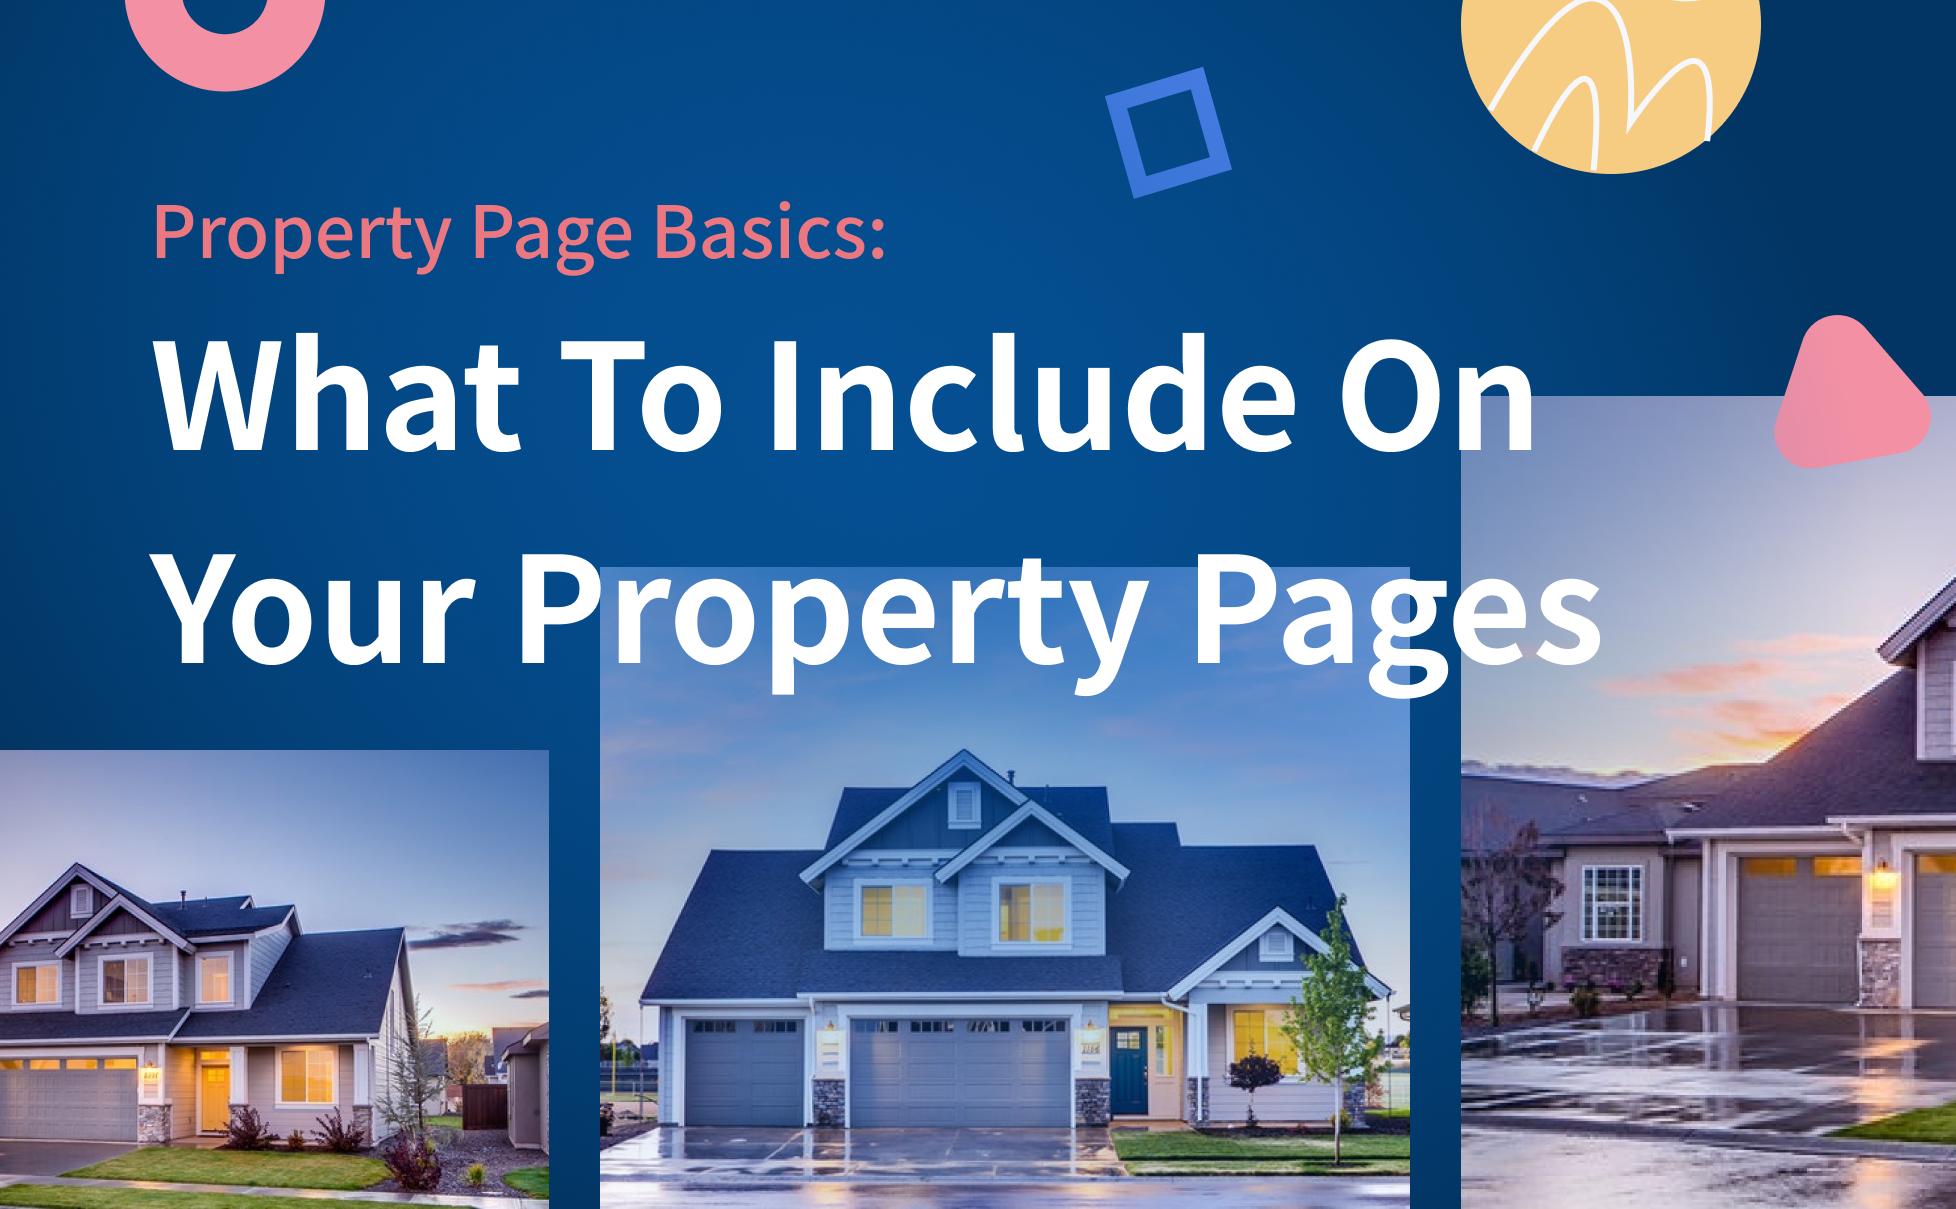 Property Page Basics: What To Include On Your Property Pages